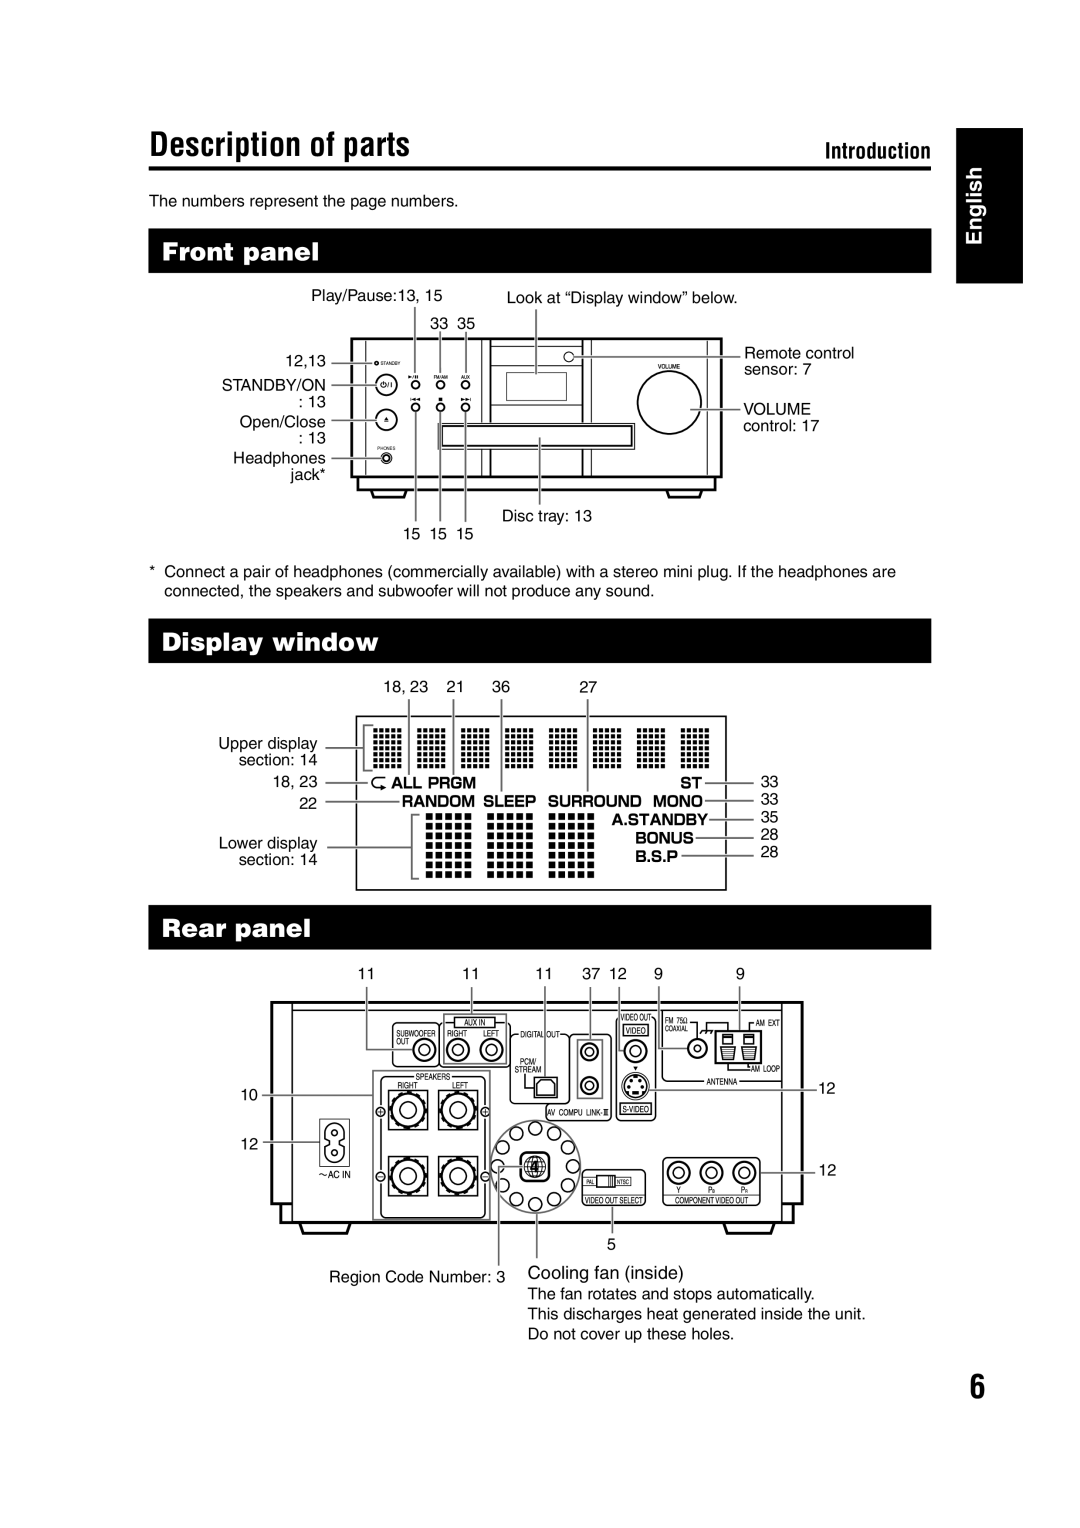 JVC EX-A1 manual Description of parts, Front panel, Display window, Rear panel, English, Introduction 